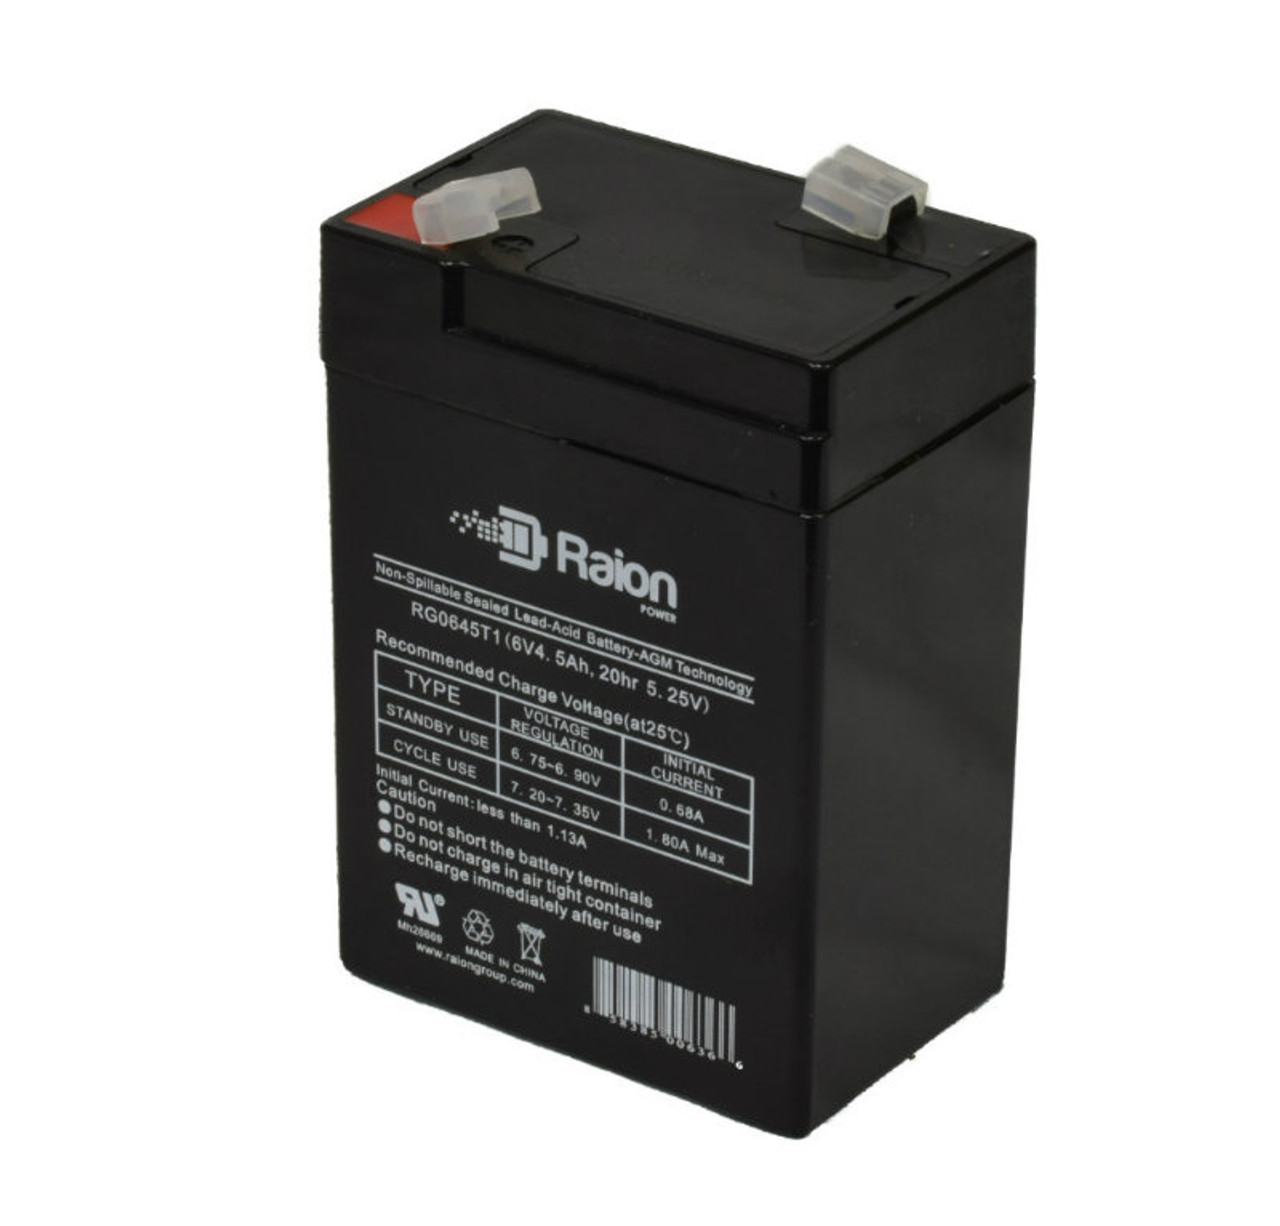 Raion Power RG0645T1 6V 4.5Ah Replacement Battery Cartridge for Canbat CBL4-6